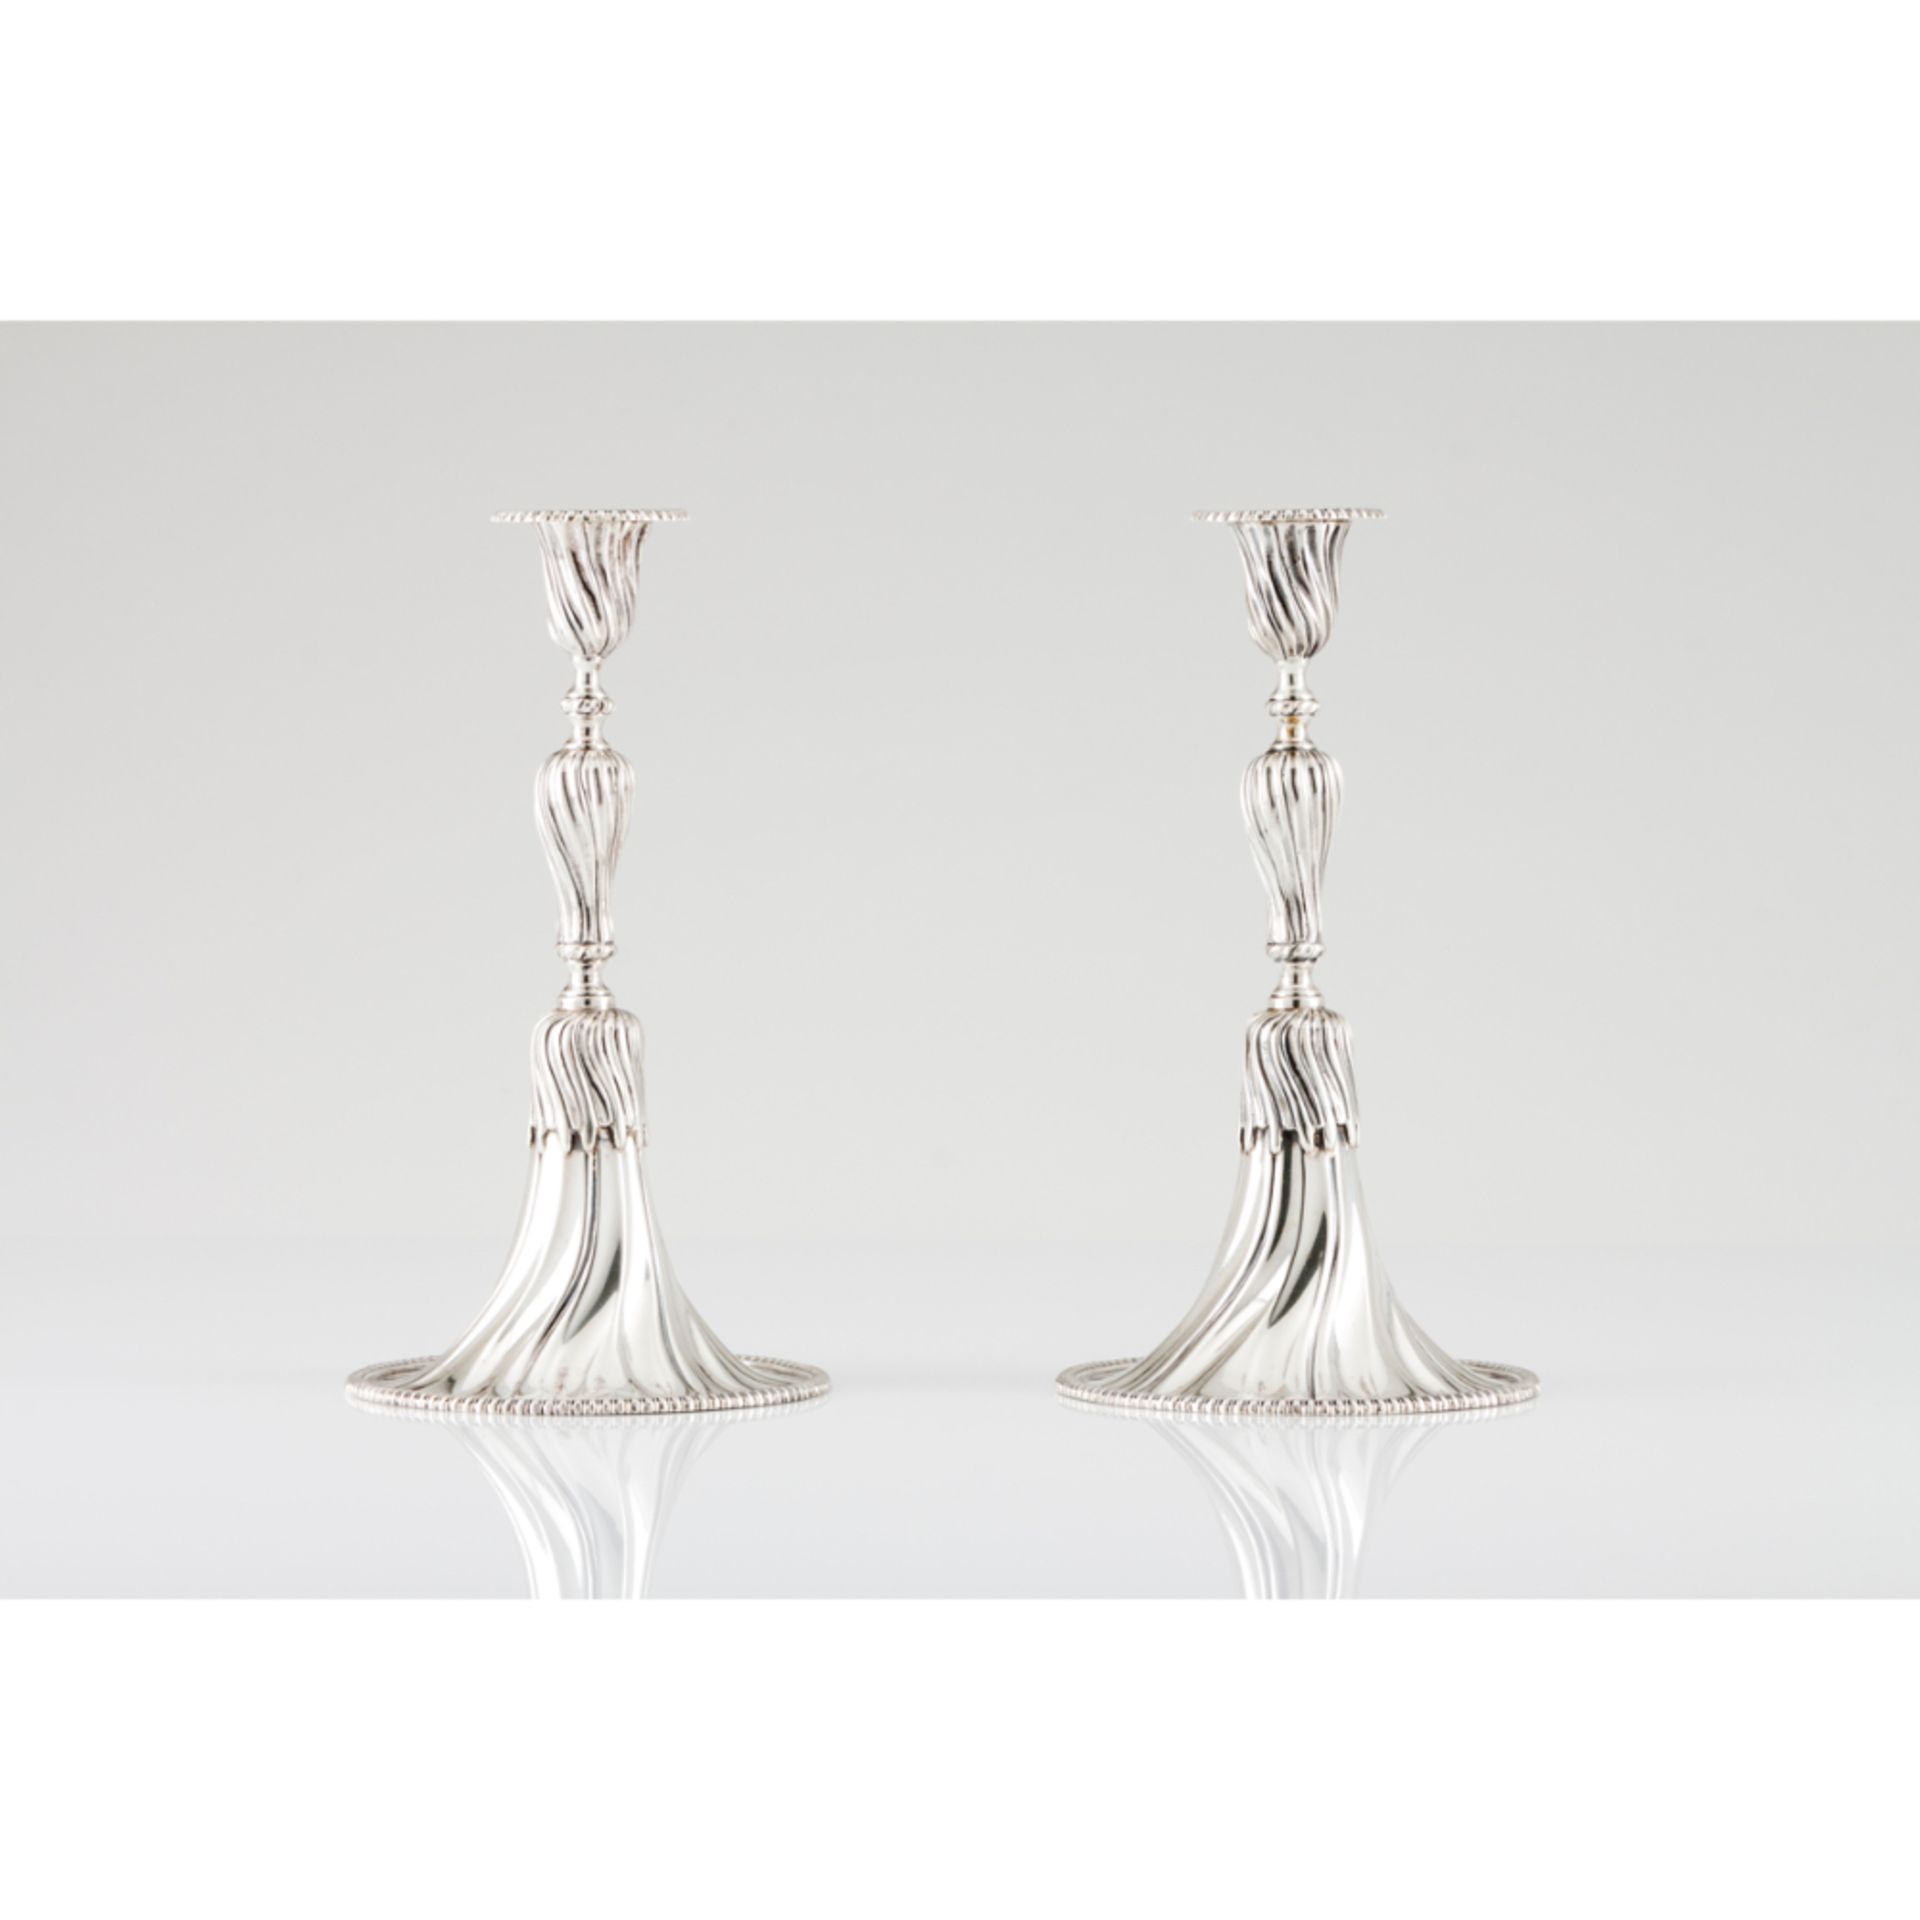 A pair of apron candlesticksPortuguese silver Spiralled decoration after 18th century prototype